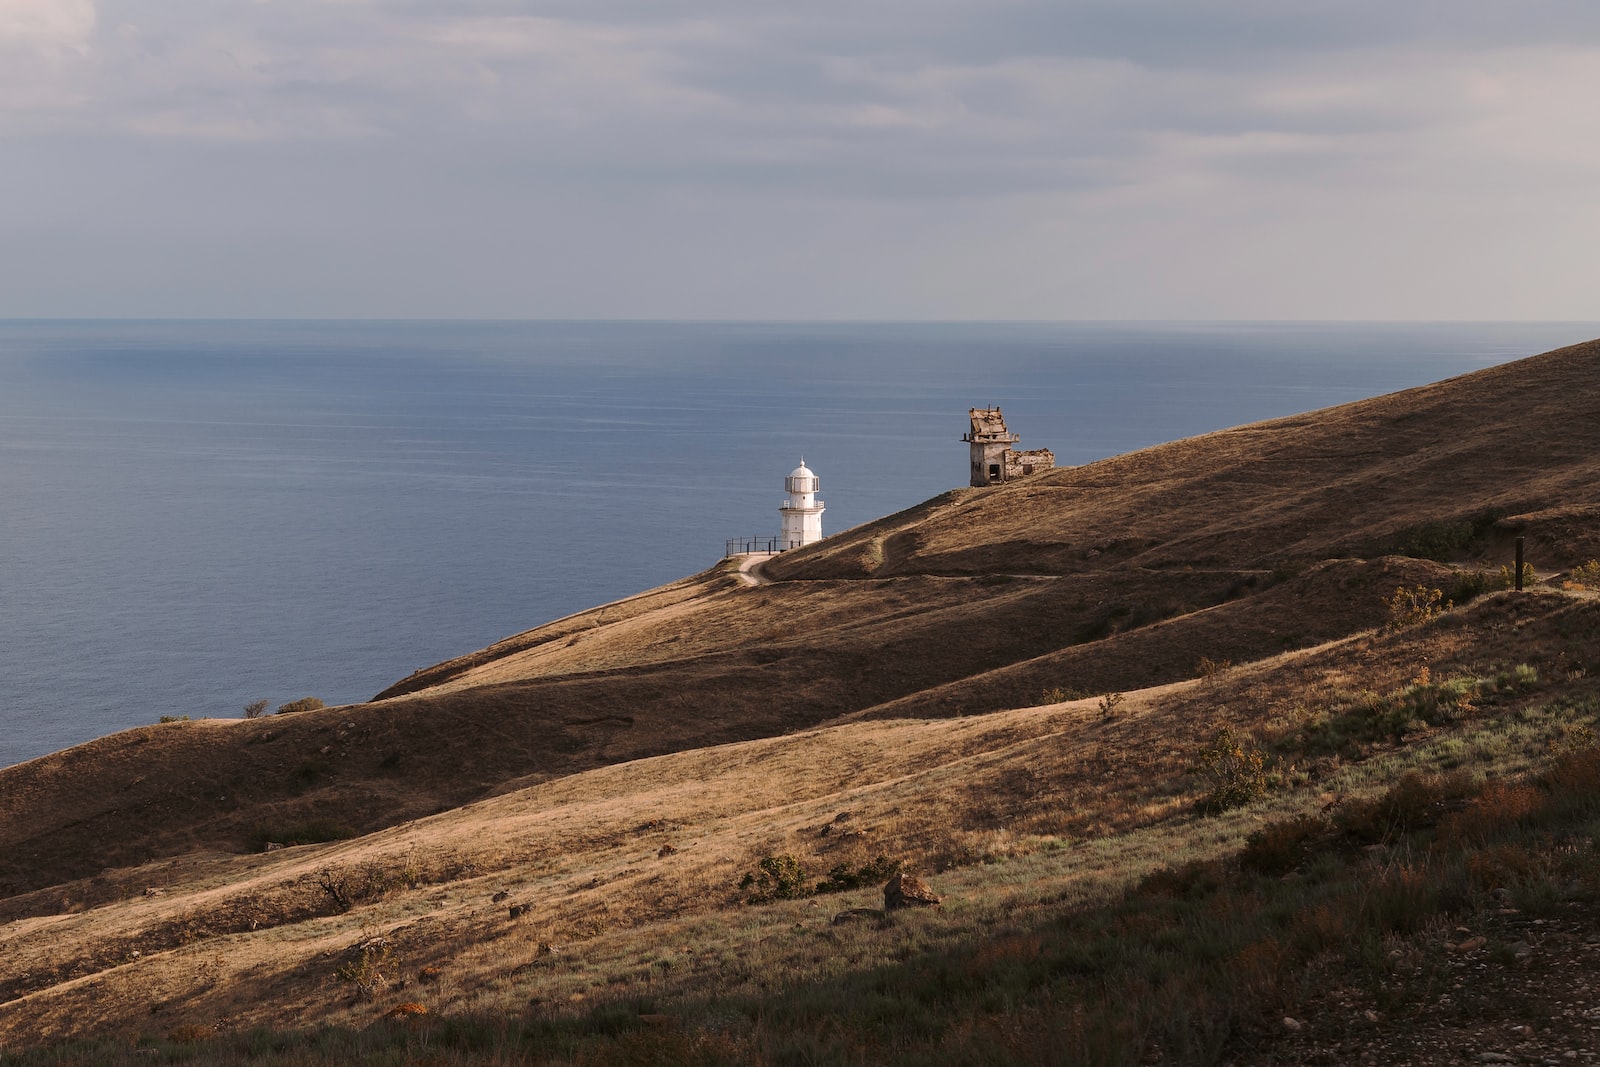 a lighthouse on a hill overlooking the ocean